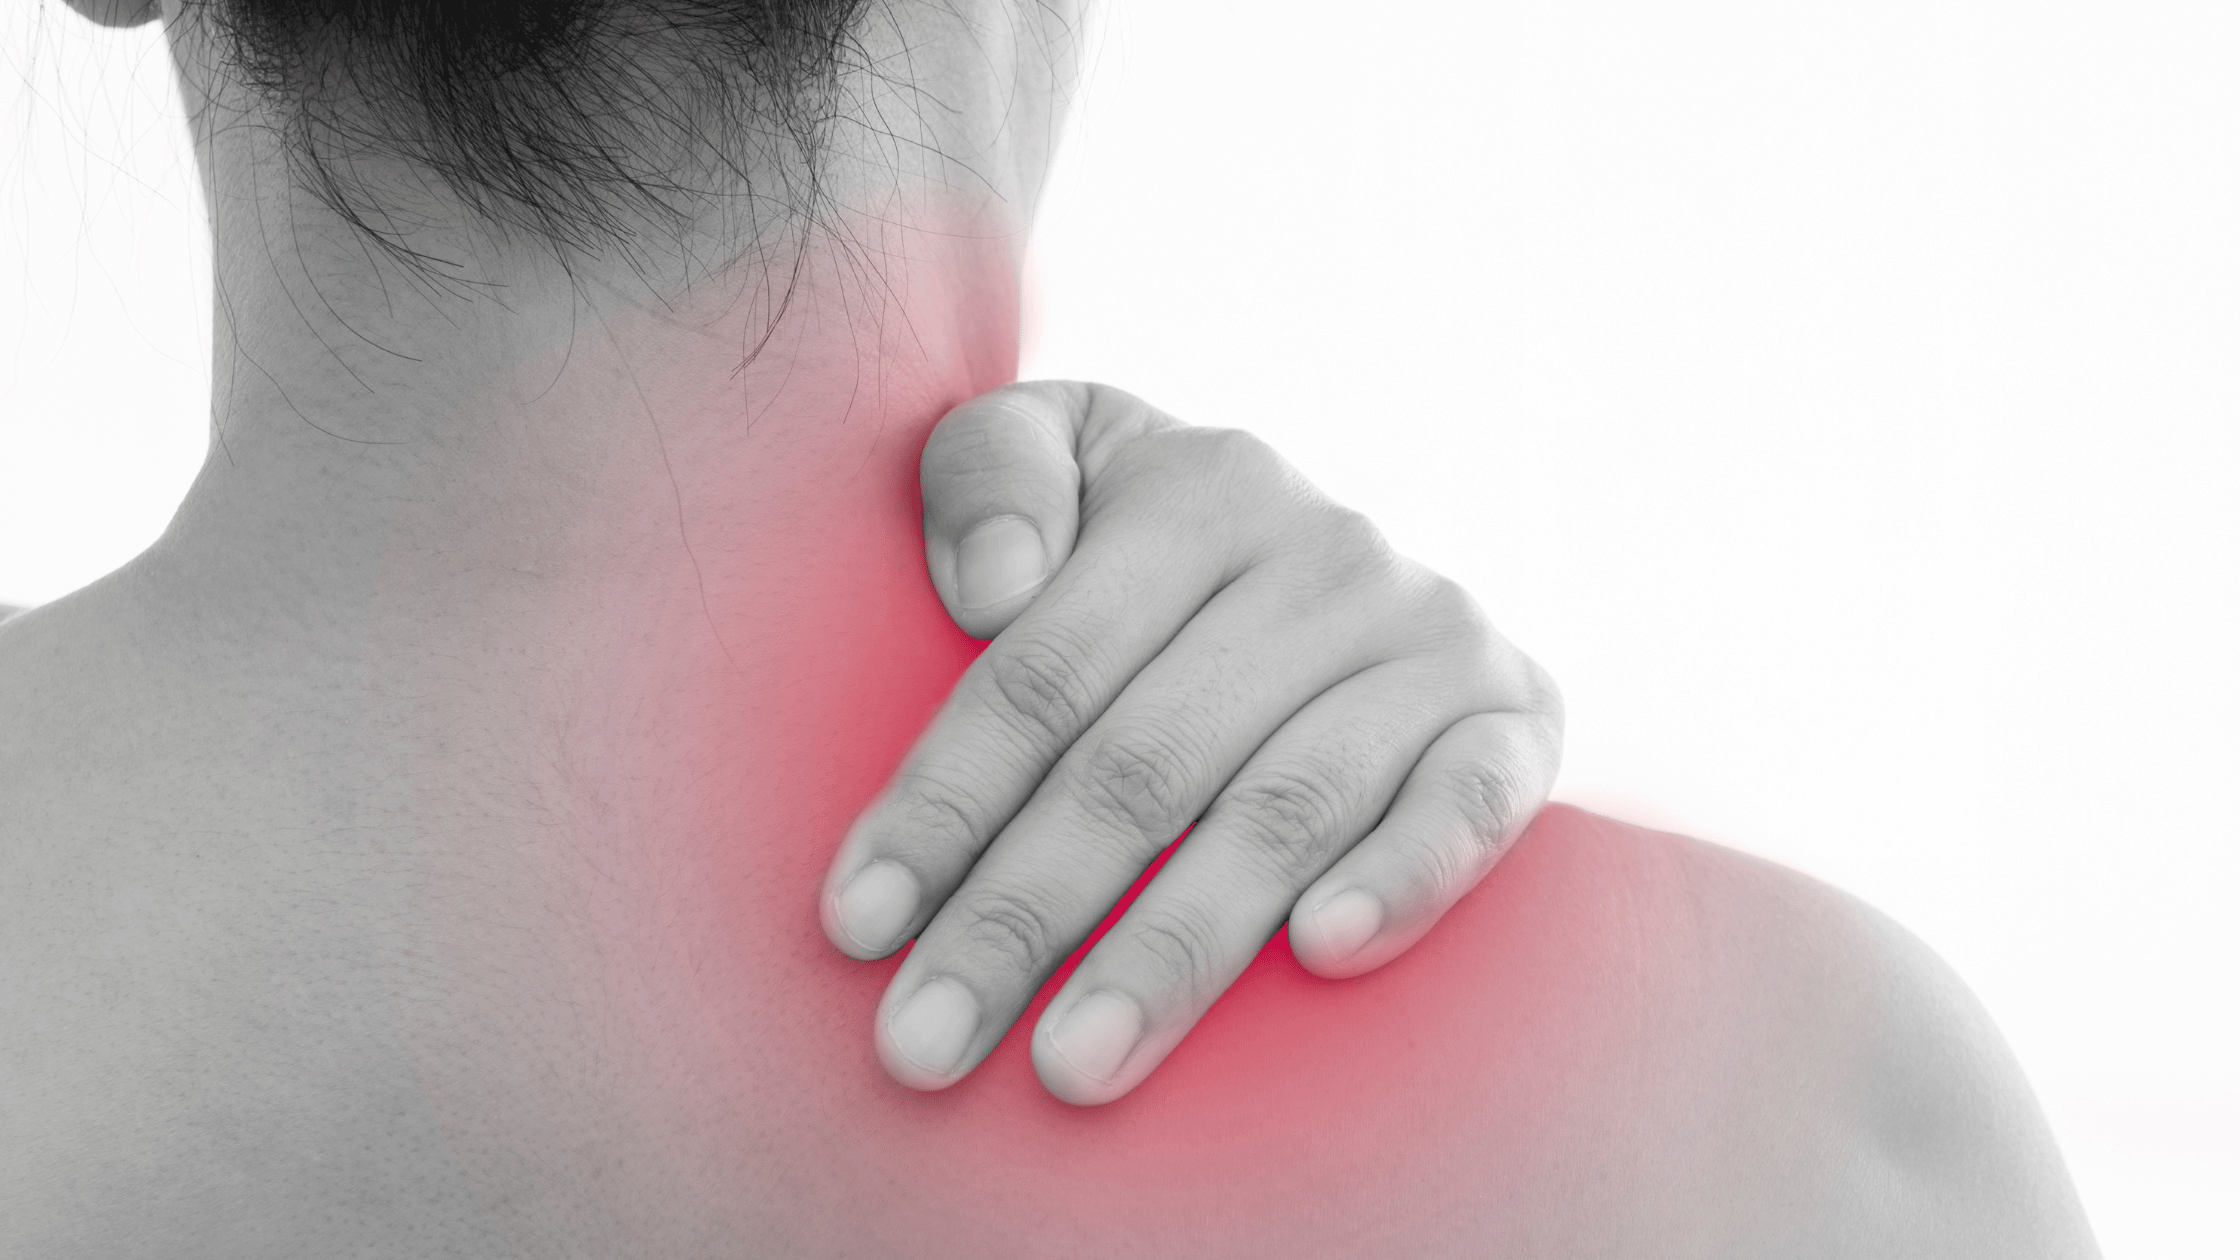 Understanding Muscle Spasms: Causes, Risk Factors, and How Physical Therapy Can Help